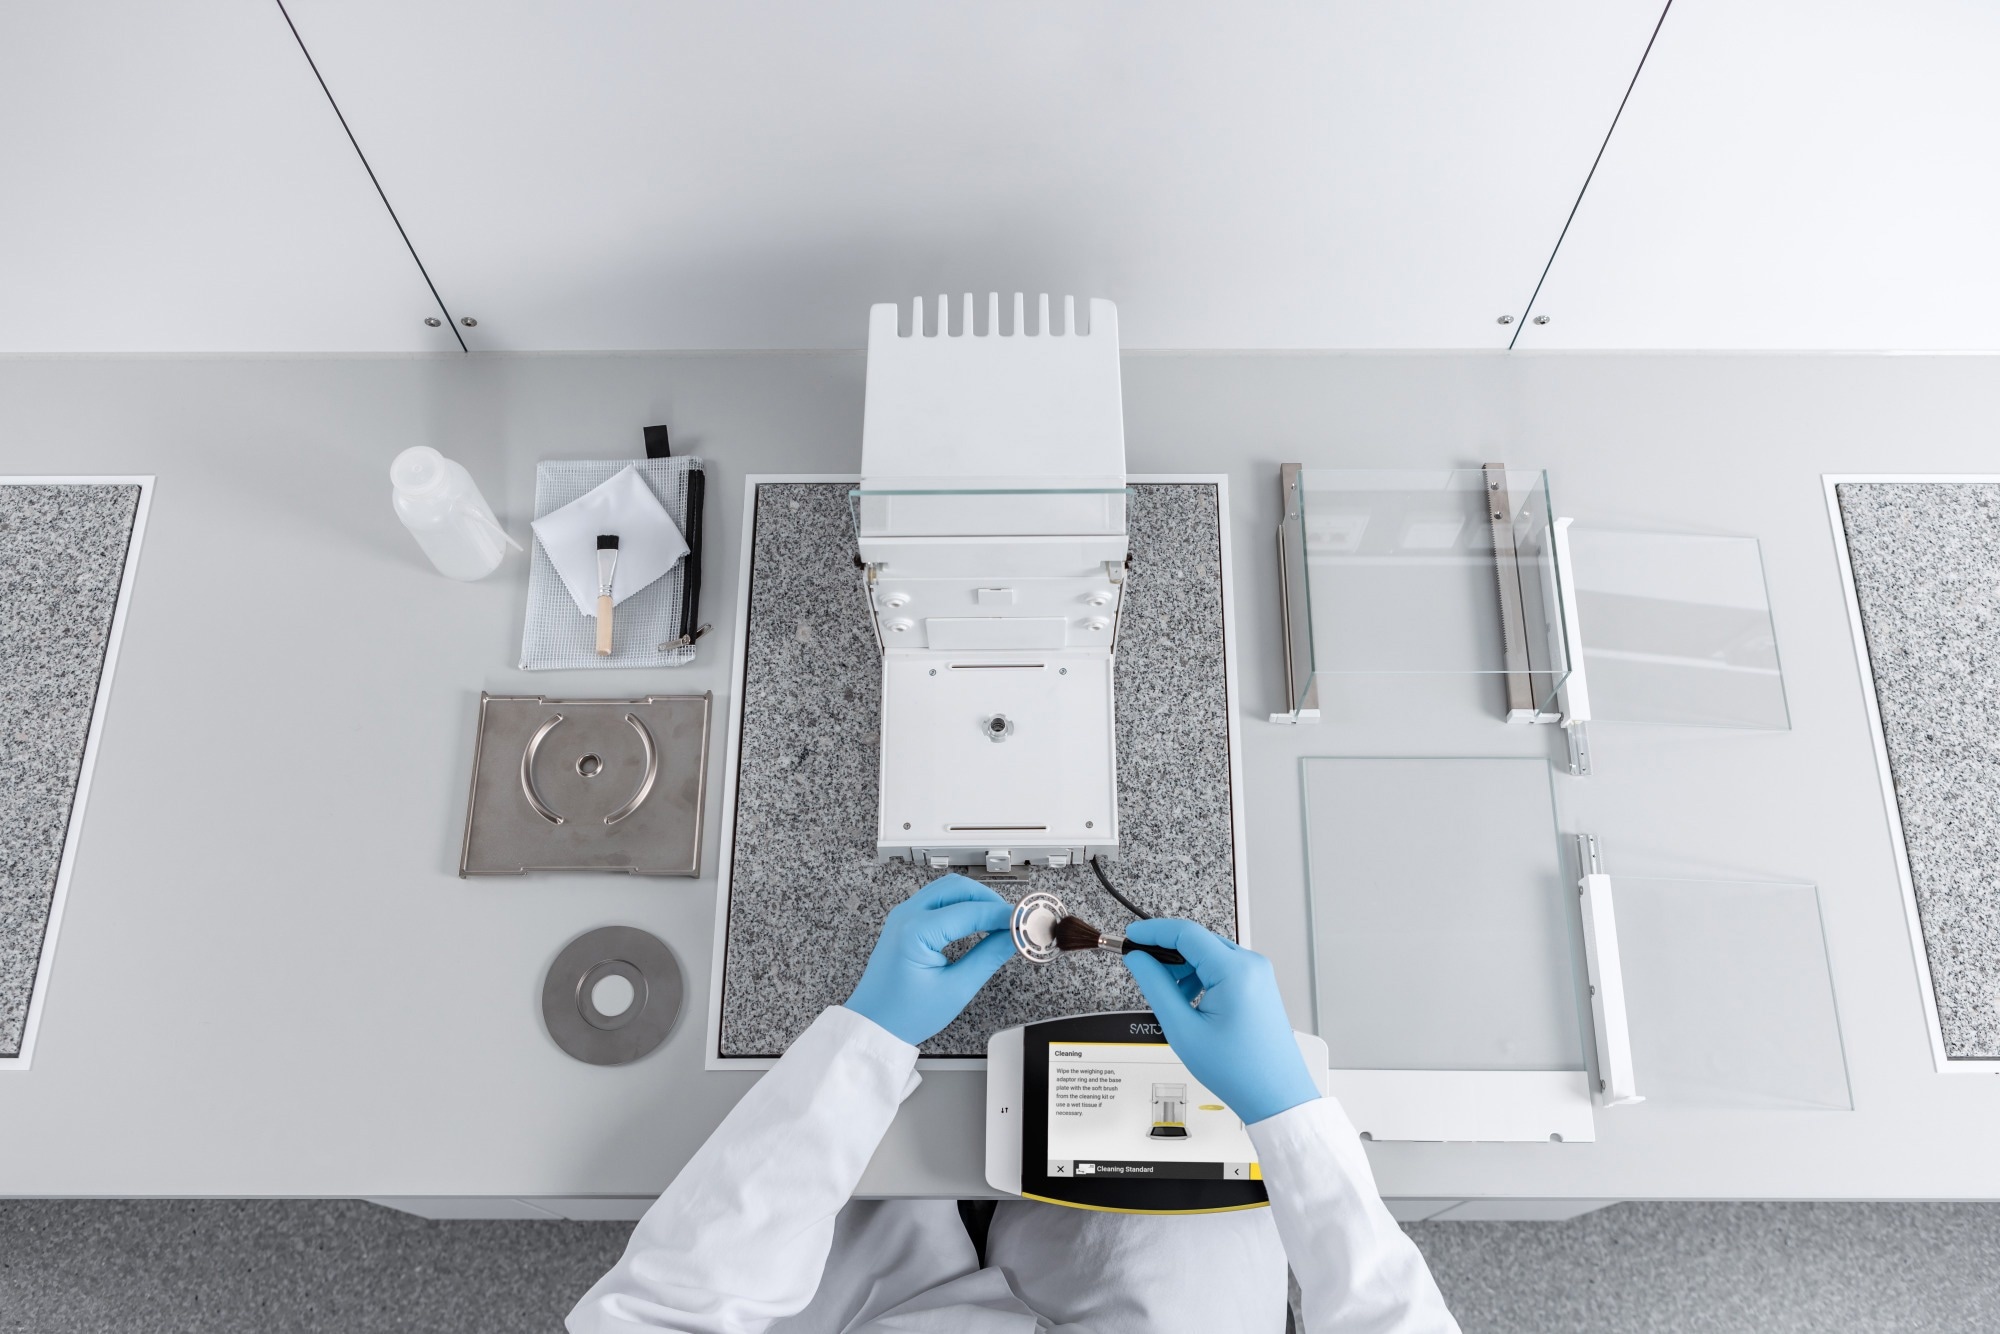 Imploring your data integrity by proper cleaning of your lab